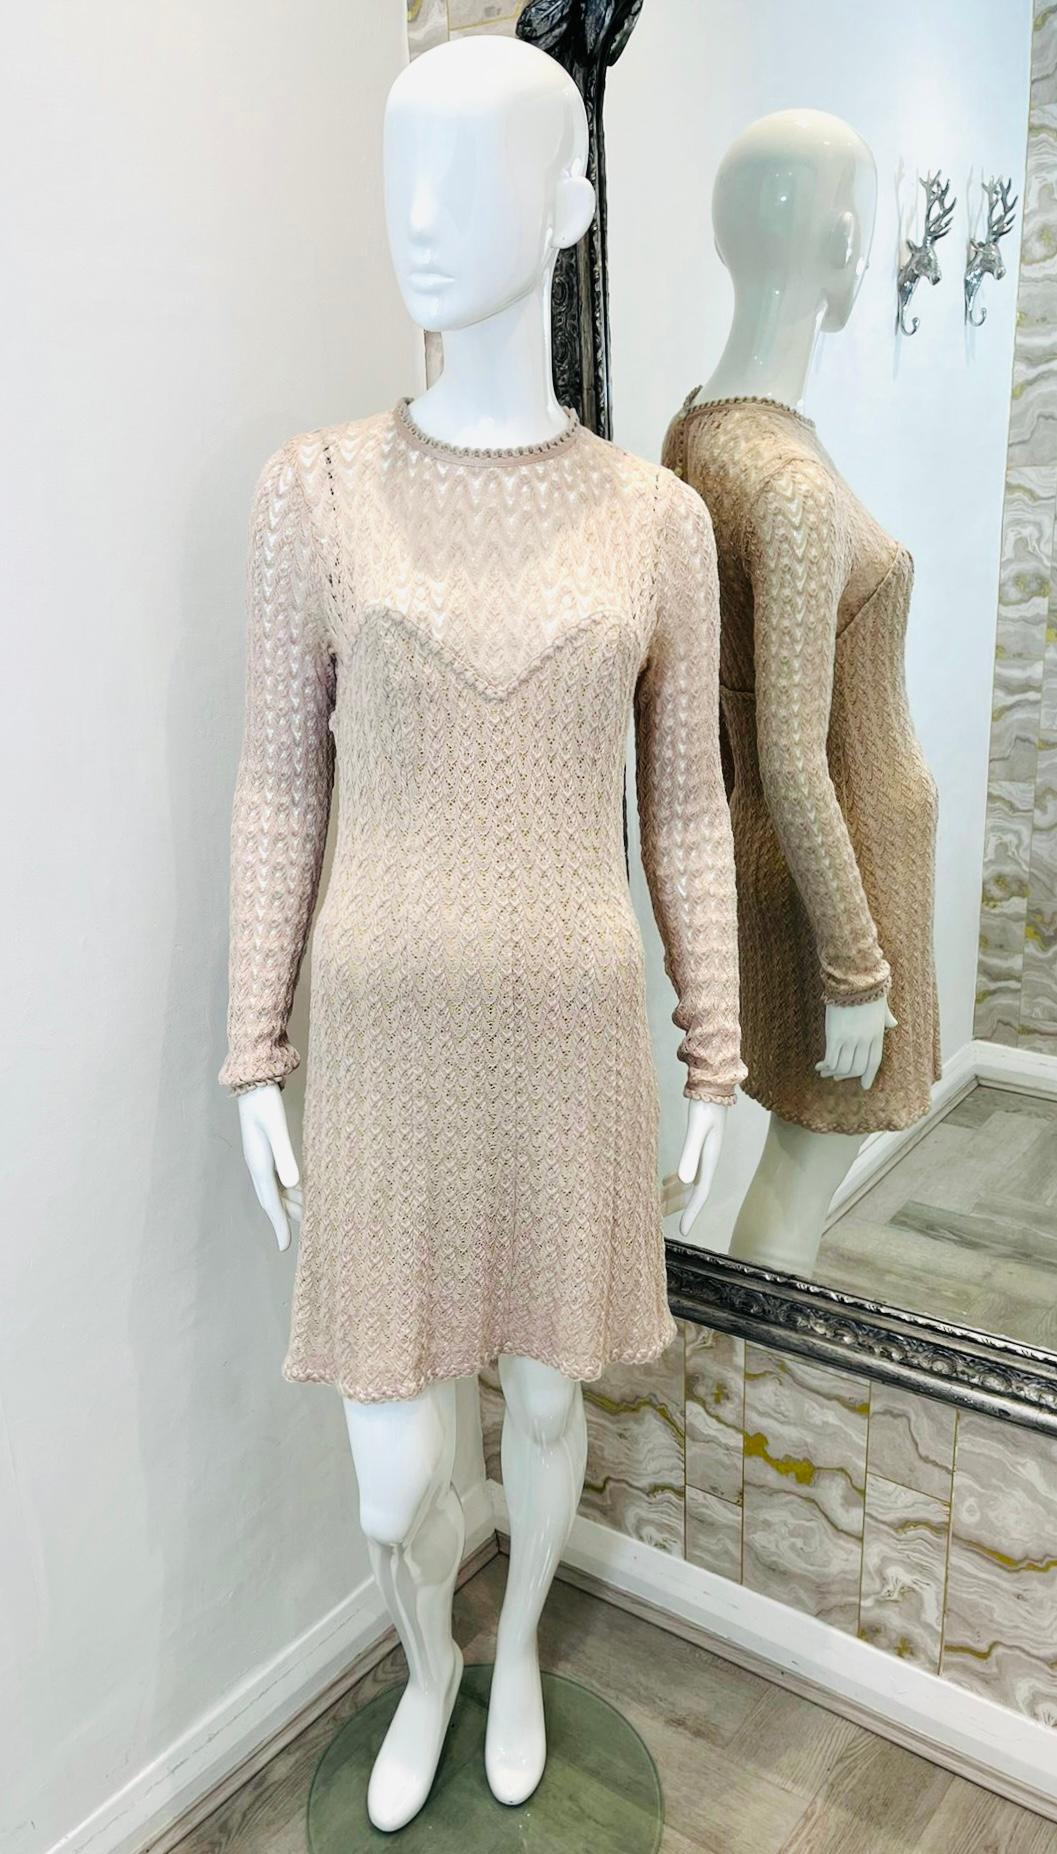 Missoni Wool Blend Crochet Knitted Dress

Beige mini dress designed with the brand's signature wave pattern.

Detailed with pearl button fastening to rear.

Featuring sheer accents to the upper, crew neckline and silk lining.

Size – 44IT

Condition